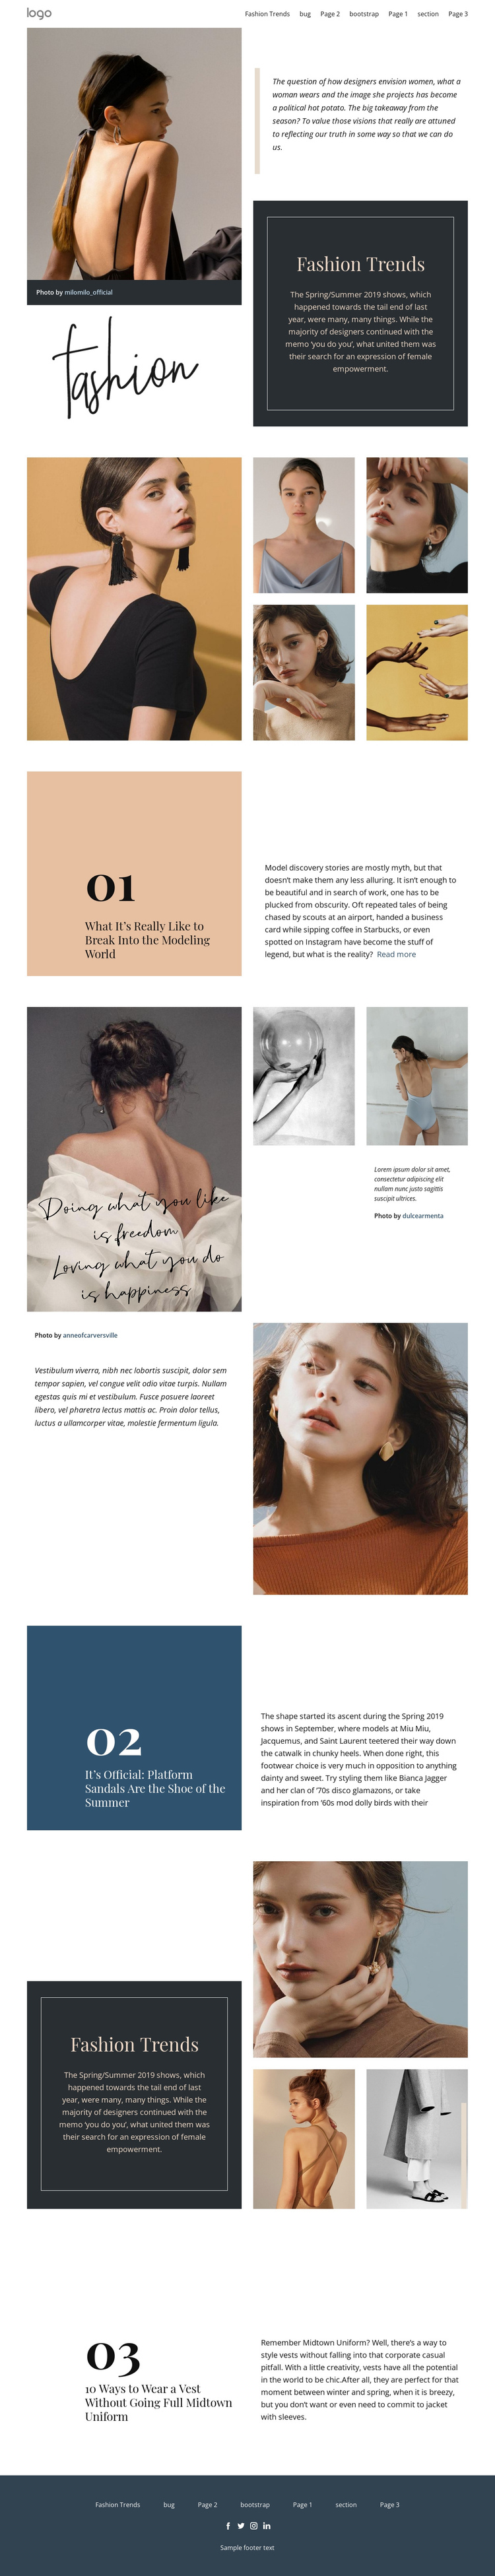 Designer vision of fashion One Page Template